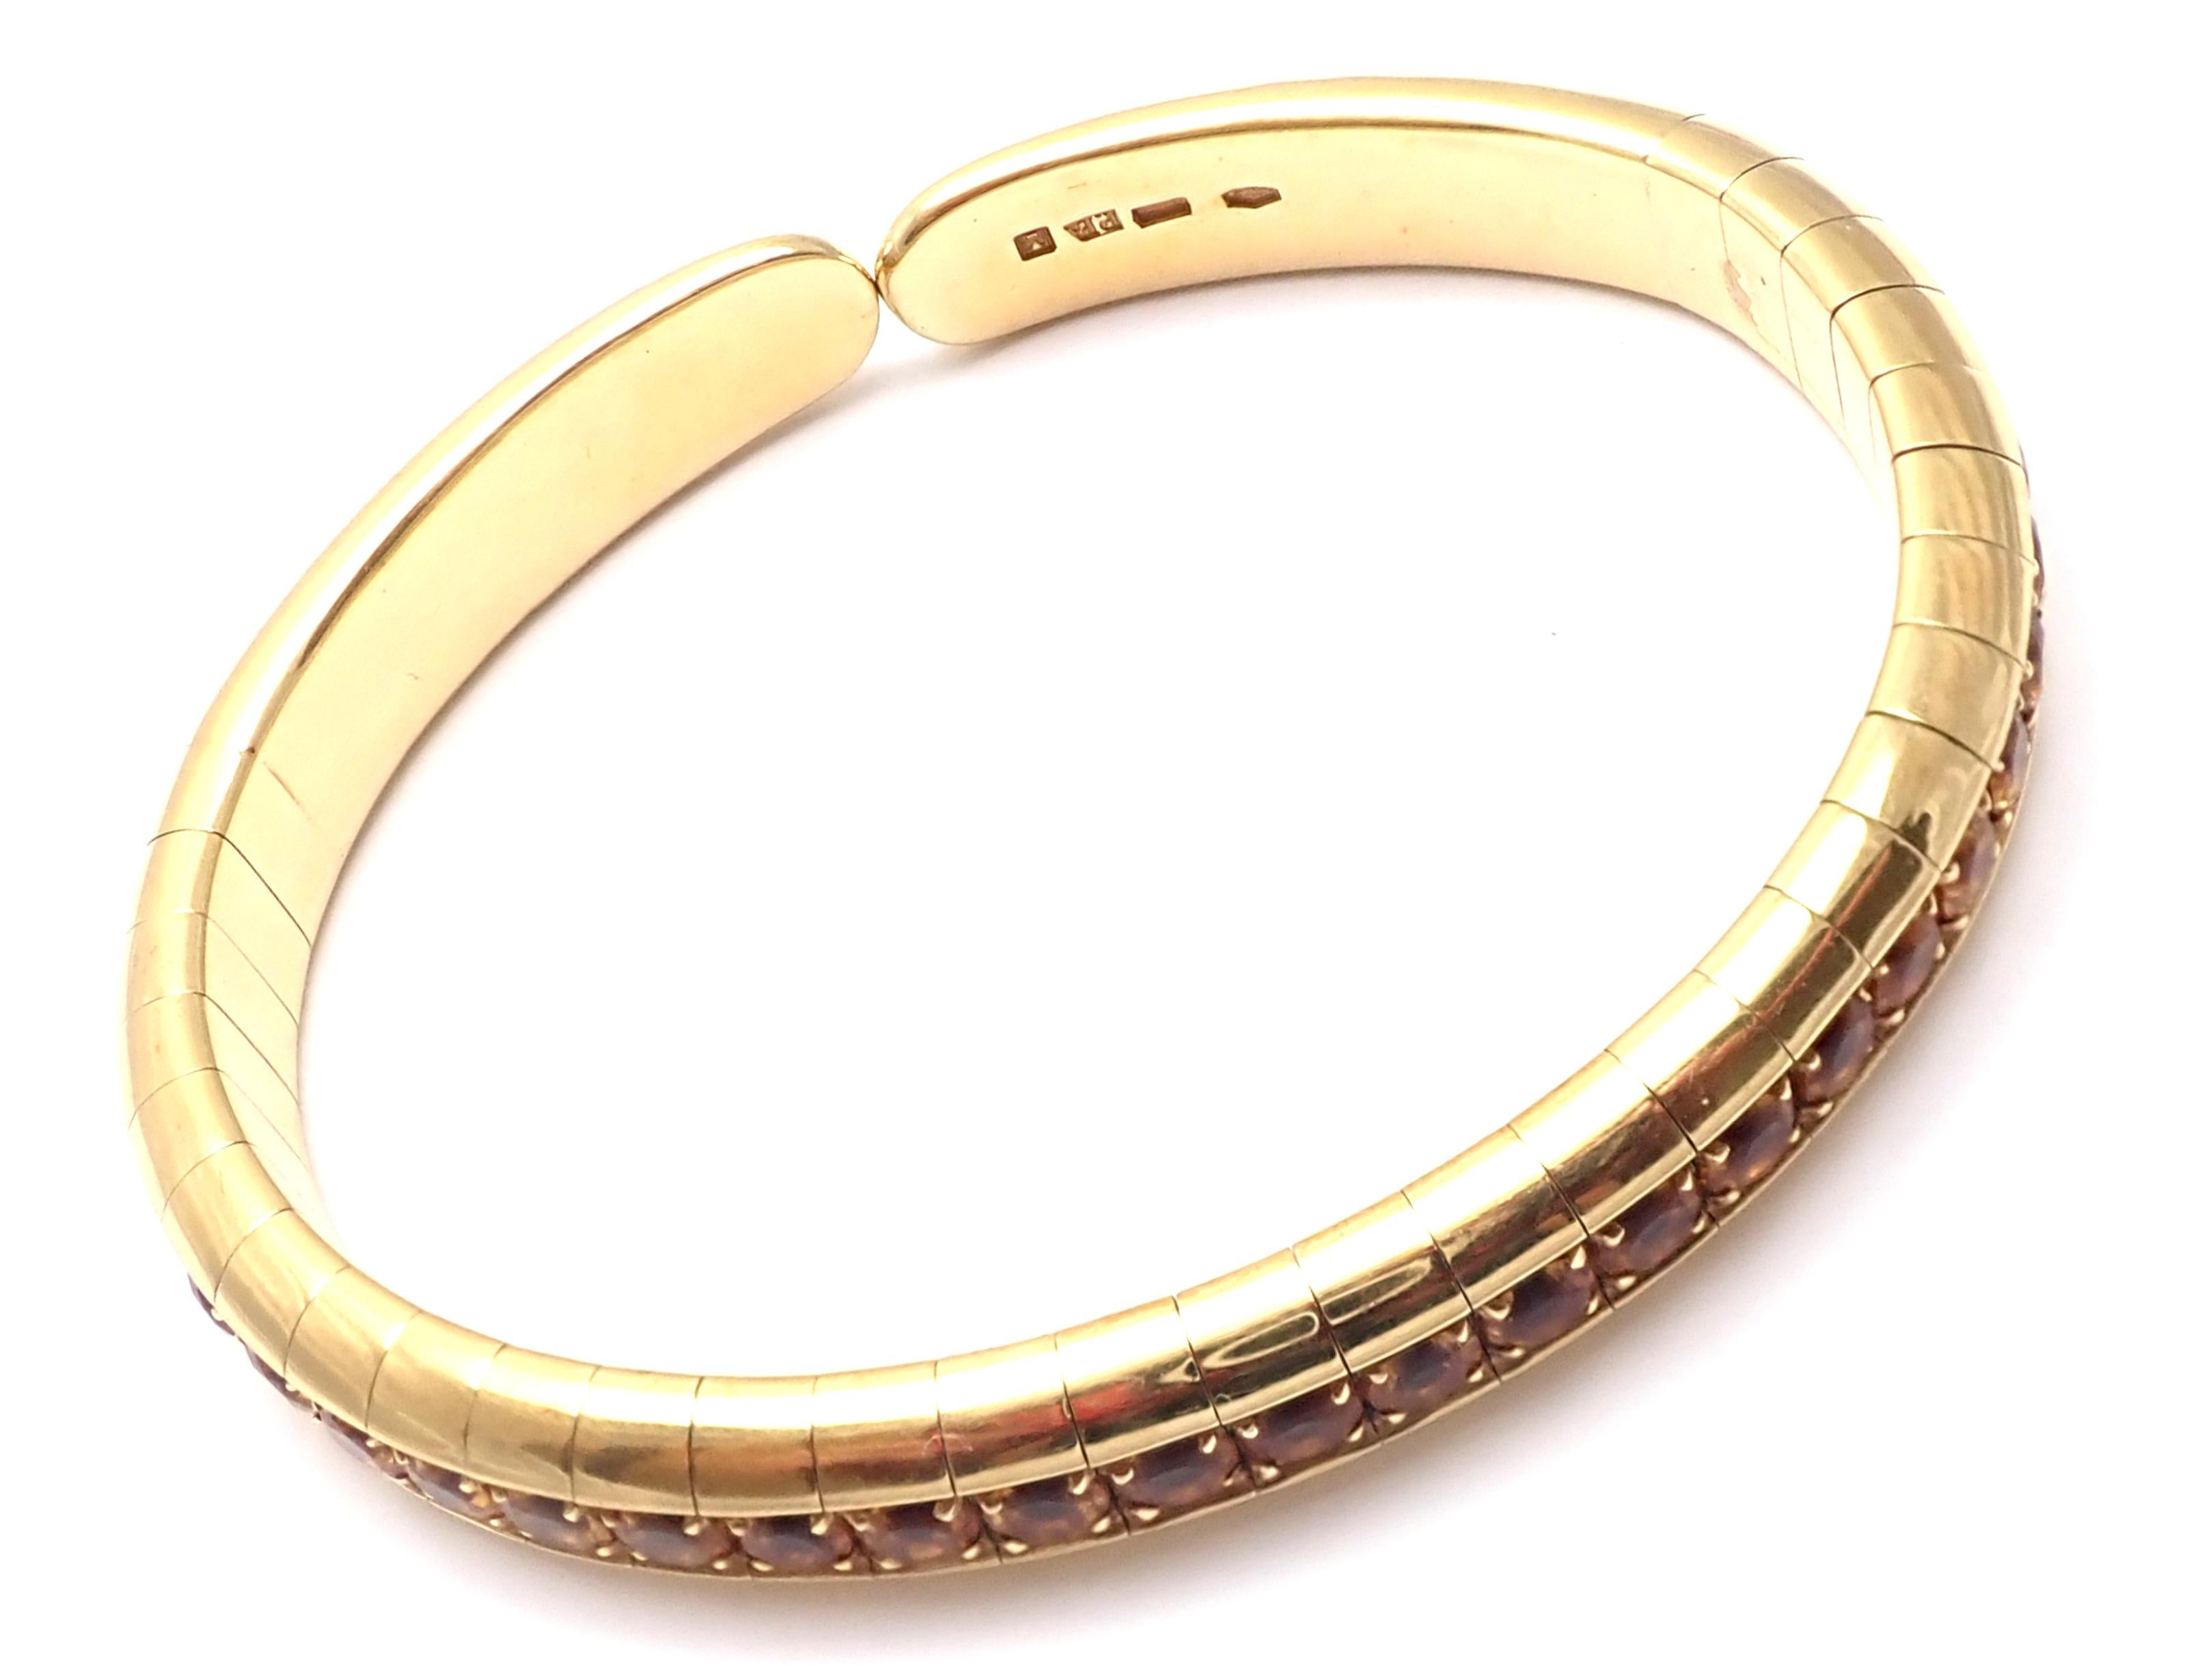 Pasquale Bruni Citrine Yellow Gold Bangle Bracelet In New Condition For Sale In Holland, PA